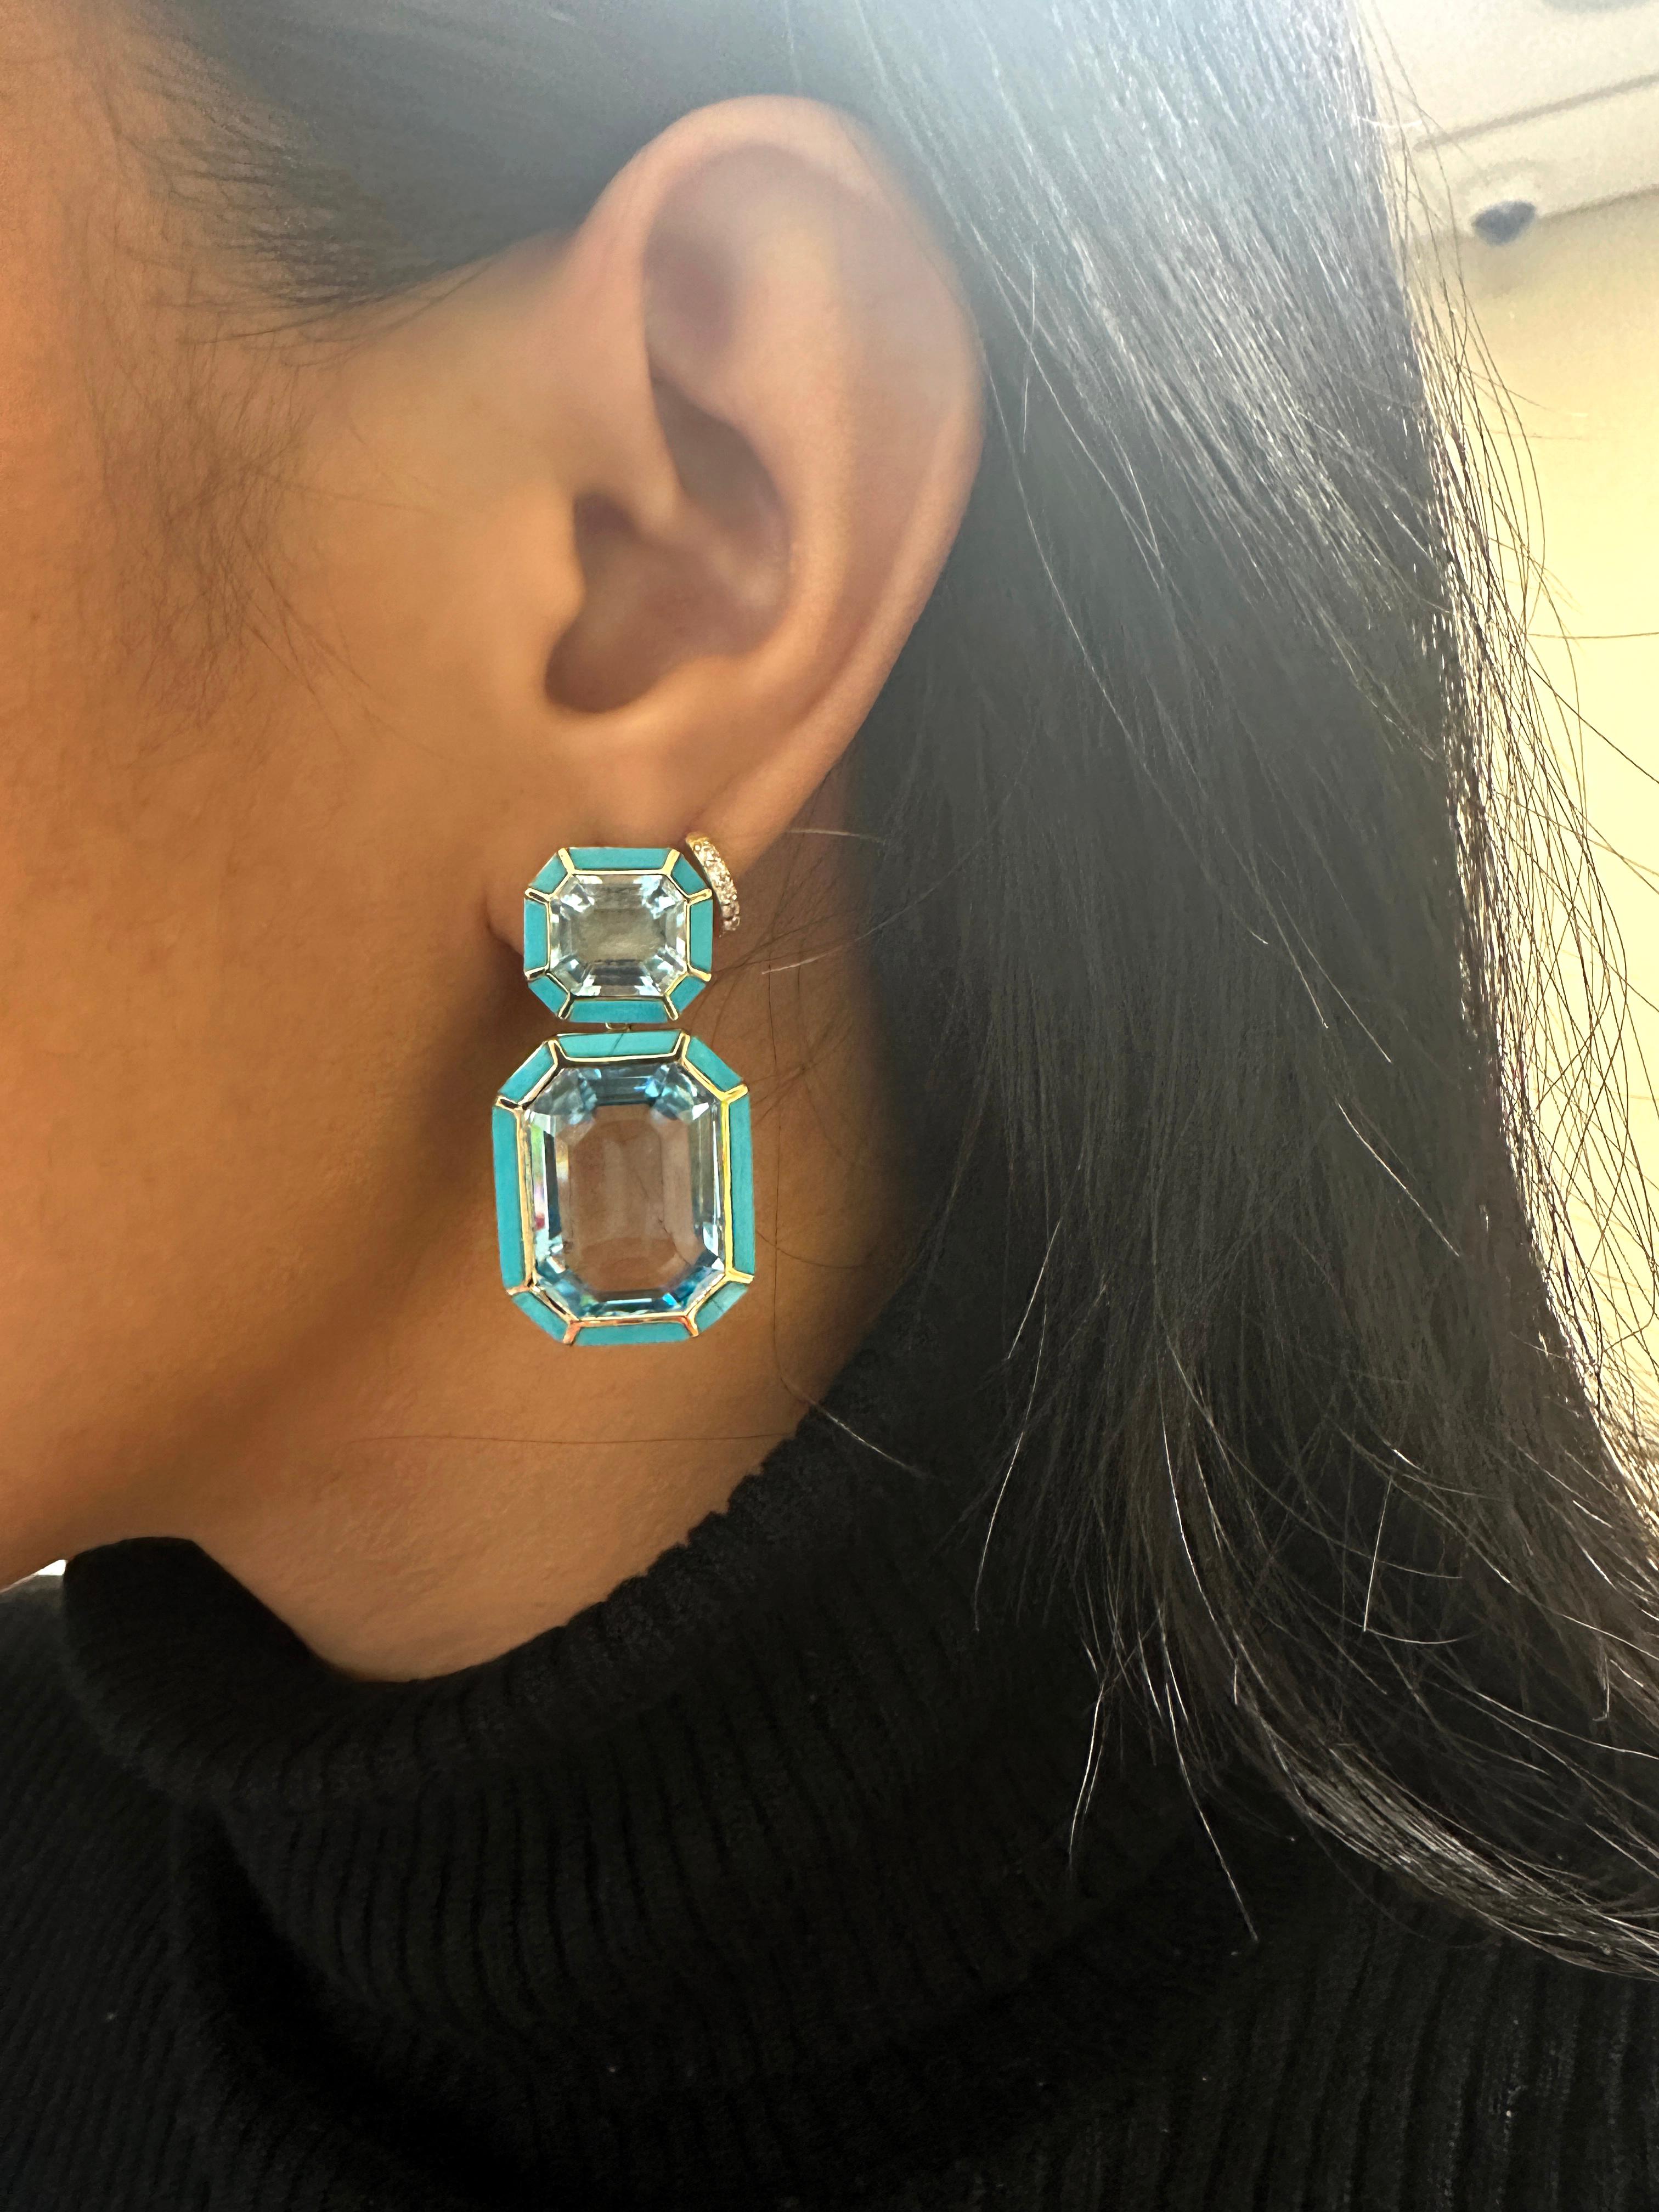 Blue Topaz and Turquoise Emerald Cut Earrings in 18K Yellow Gold, from 'Mélange' Collection.

Beautifully crafted, these special pieces from Goshwara are not to be missed!

* Gemstone: 100% Earth Mined 
* Approx. gemstone Weight: 54.69 Carats (Blue